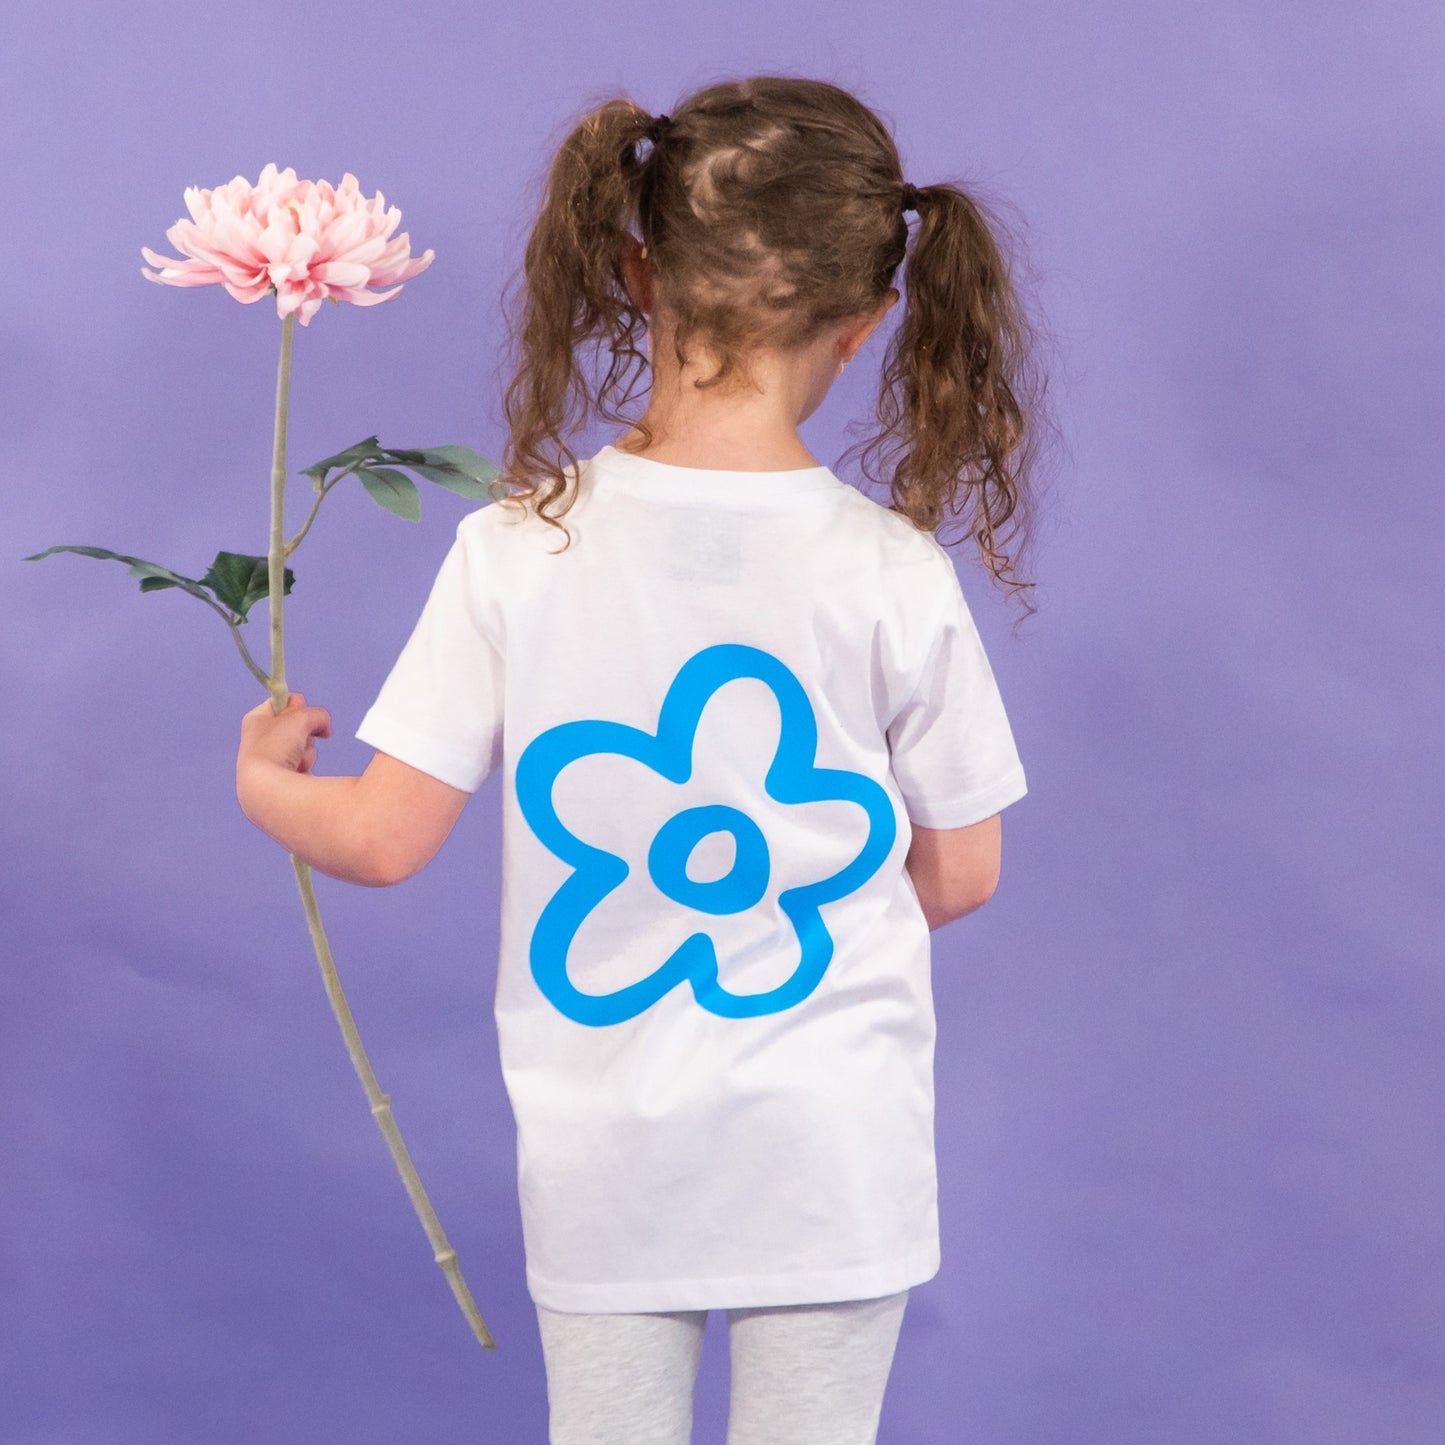 Children's Personalised Name Doodle T-Shirt